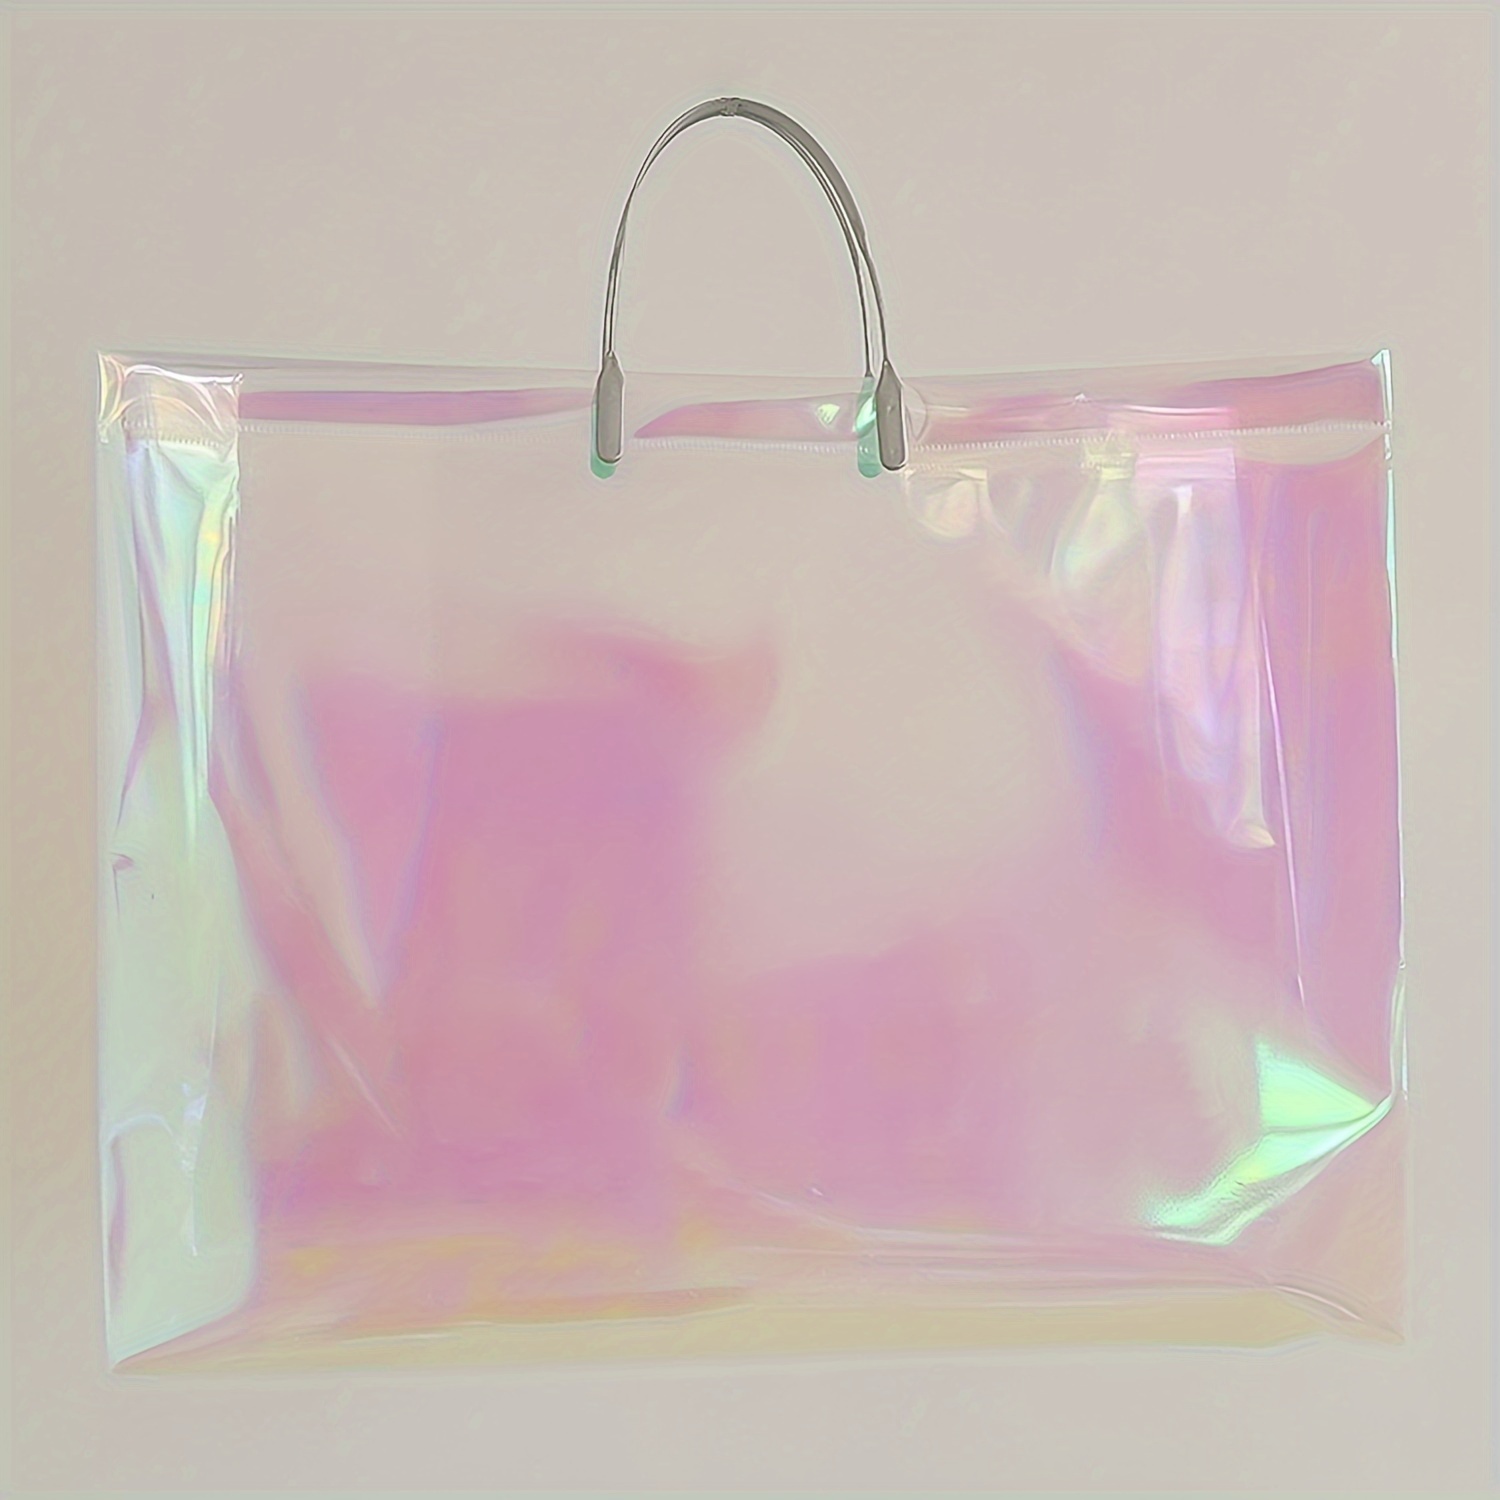 

Elegant Pvc Holographic Tote Bag: Perfect For Everyday Use Or As A Festive Gift